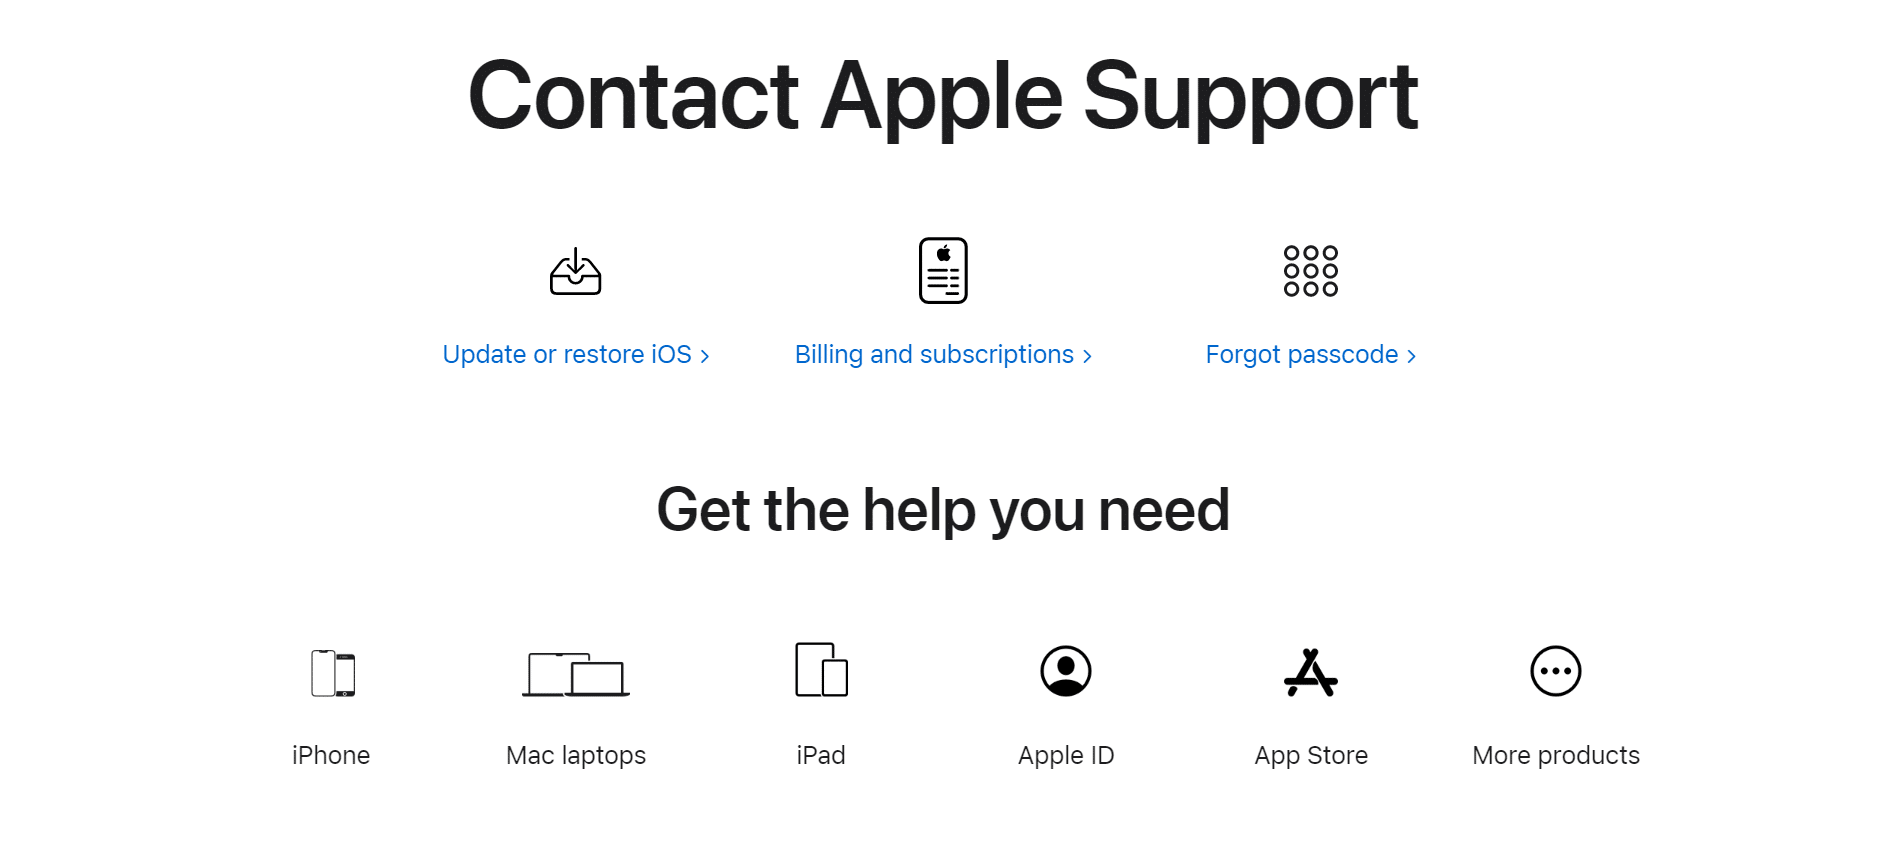 Contact Apple support to fix the Magic mouse not scrolling or connecting issue